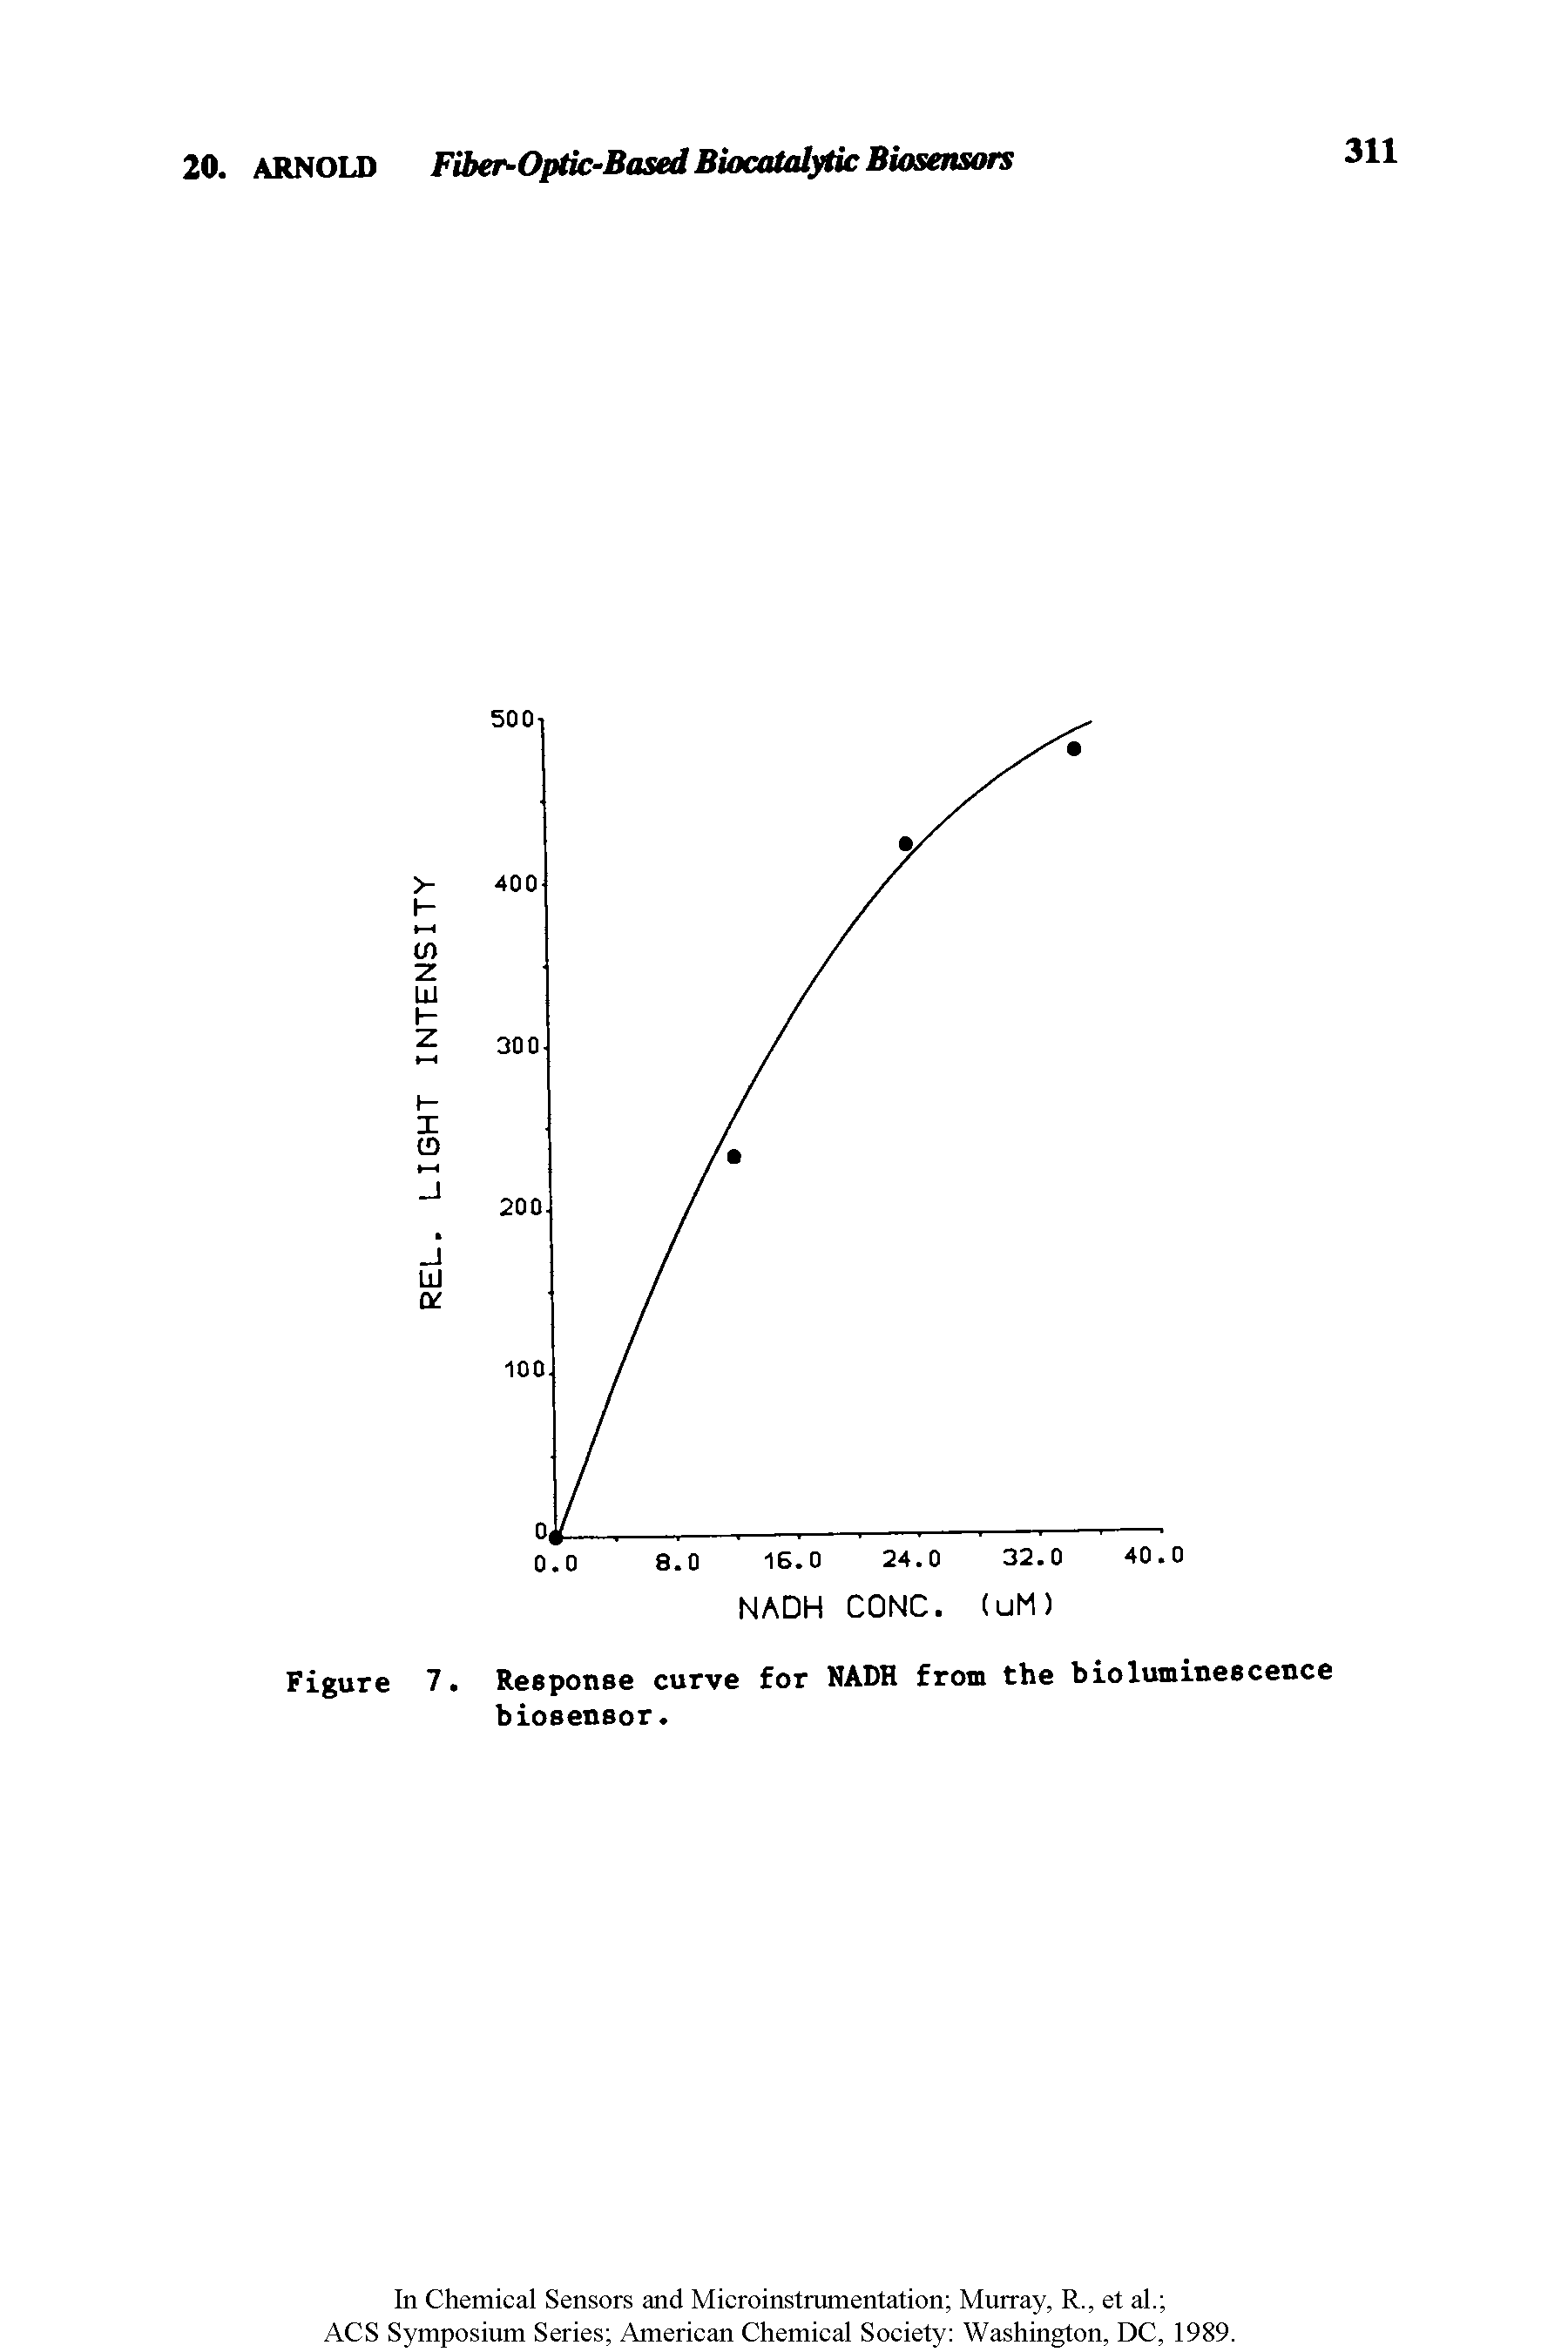 Figure 7. Response curve for NADH from the bioluminescence biosensor.